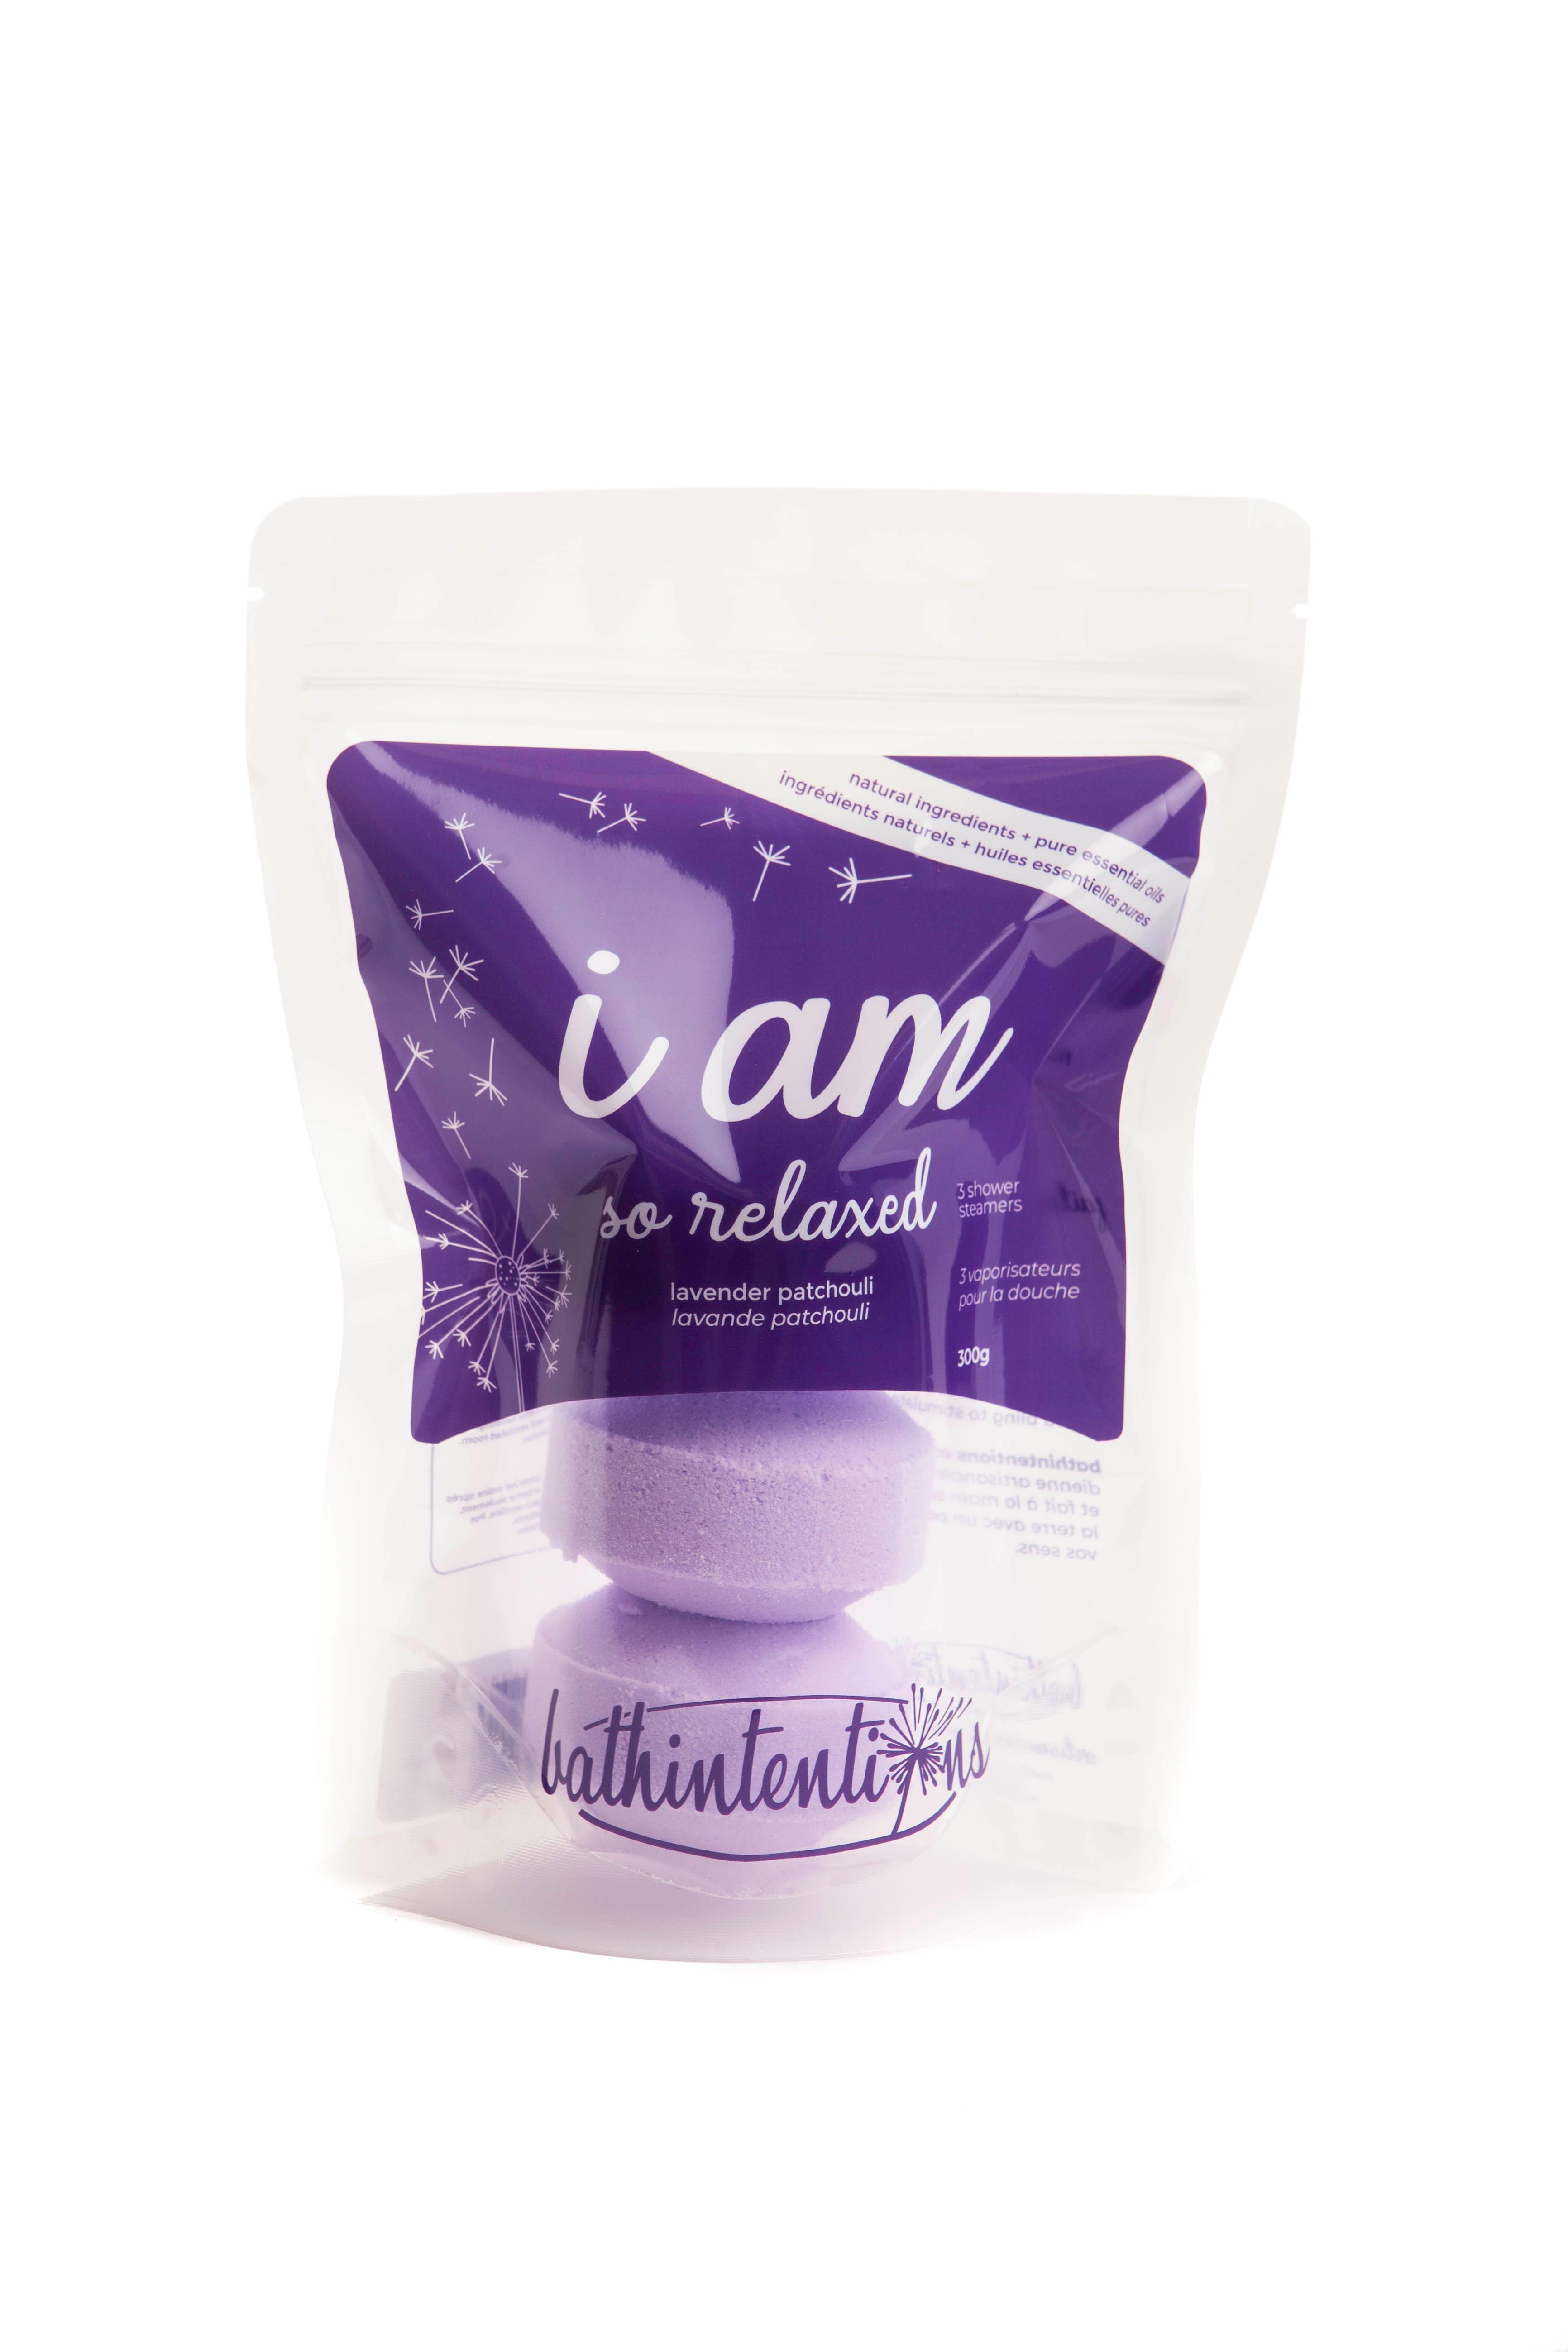 i am so relaxed | shower steamers | lavender patchouli